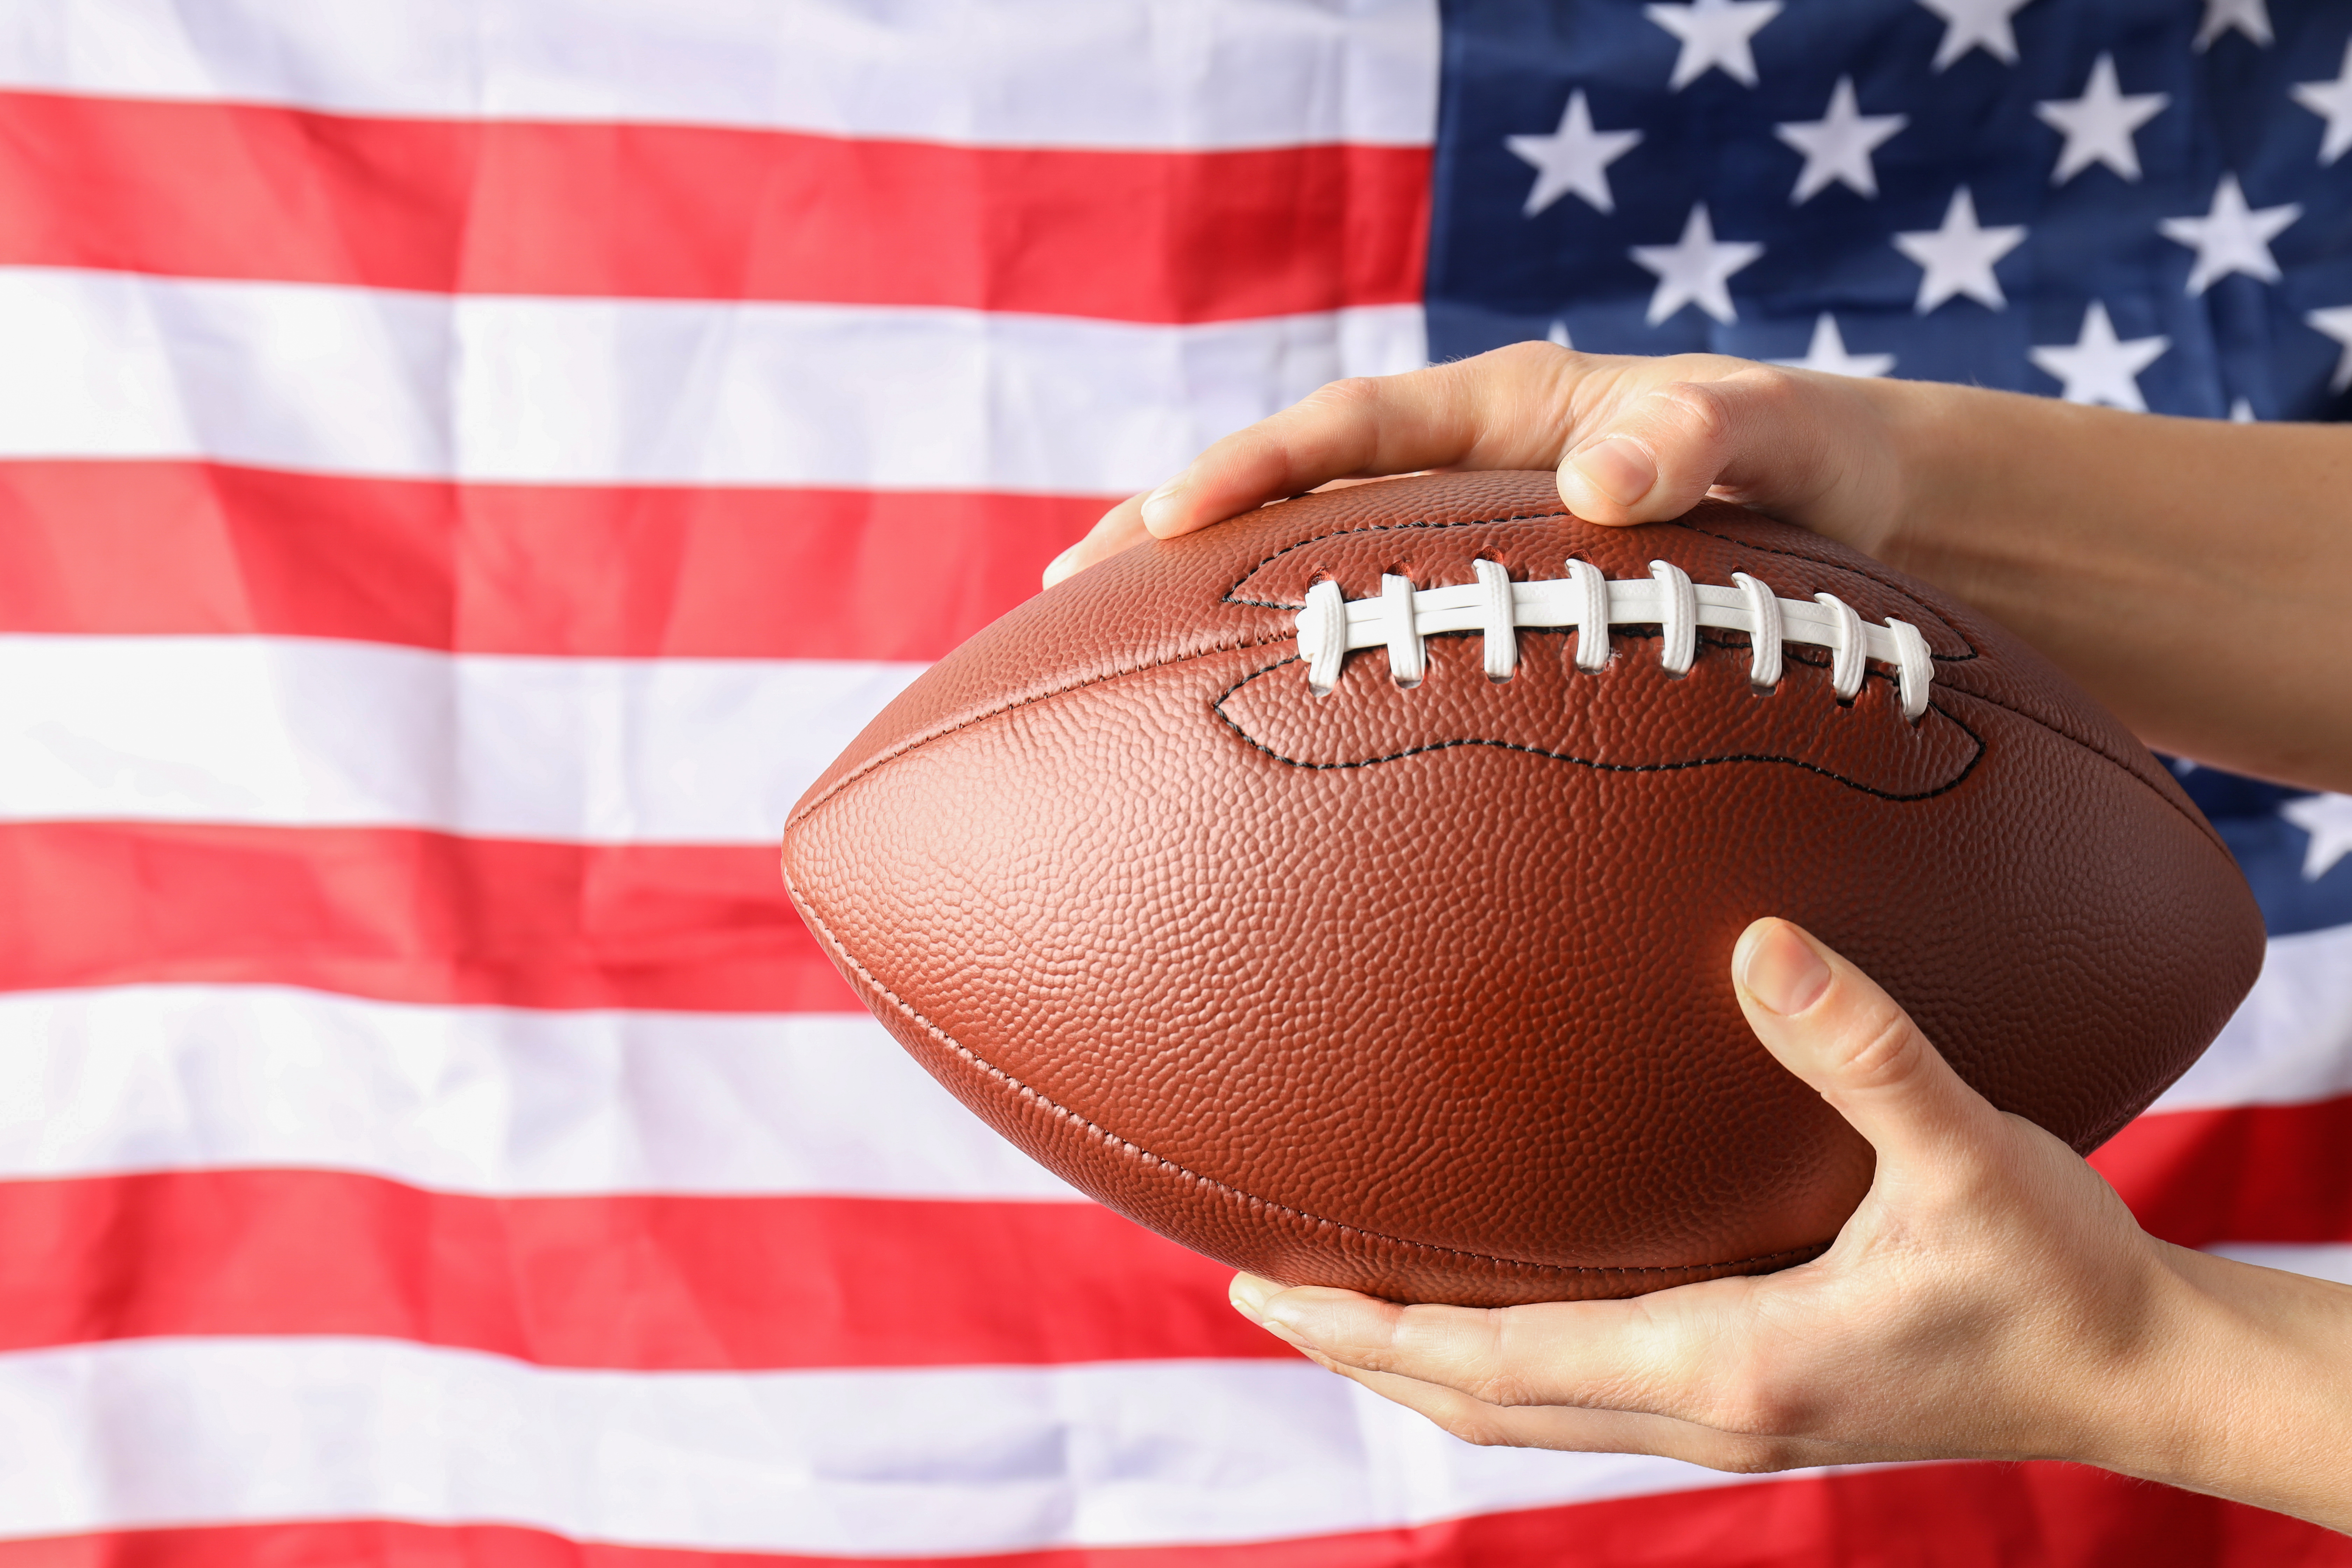 Super Bowl watch parties in Franklin and Nashville, TN, list of sports bars, restaurants and family entertainment centers showing the big football game_Football in hands with the US flag as background.